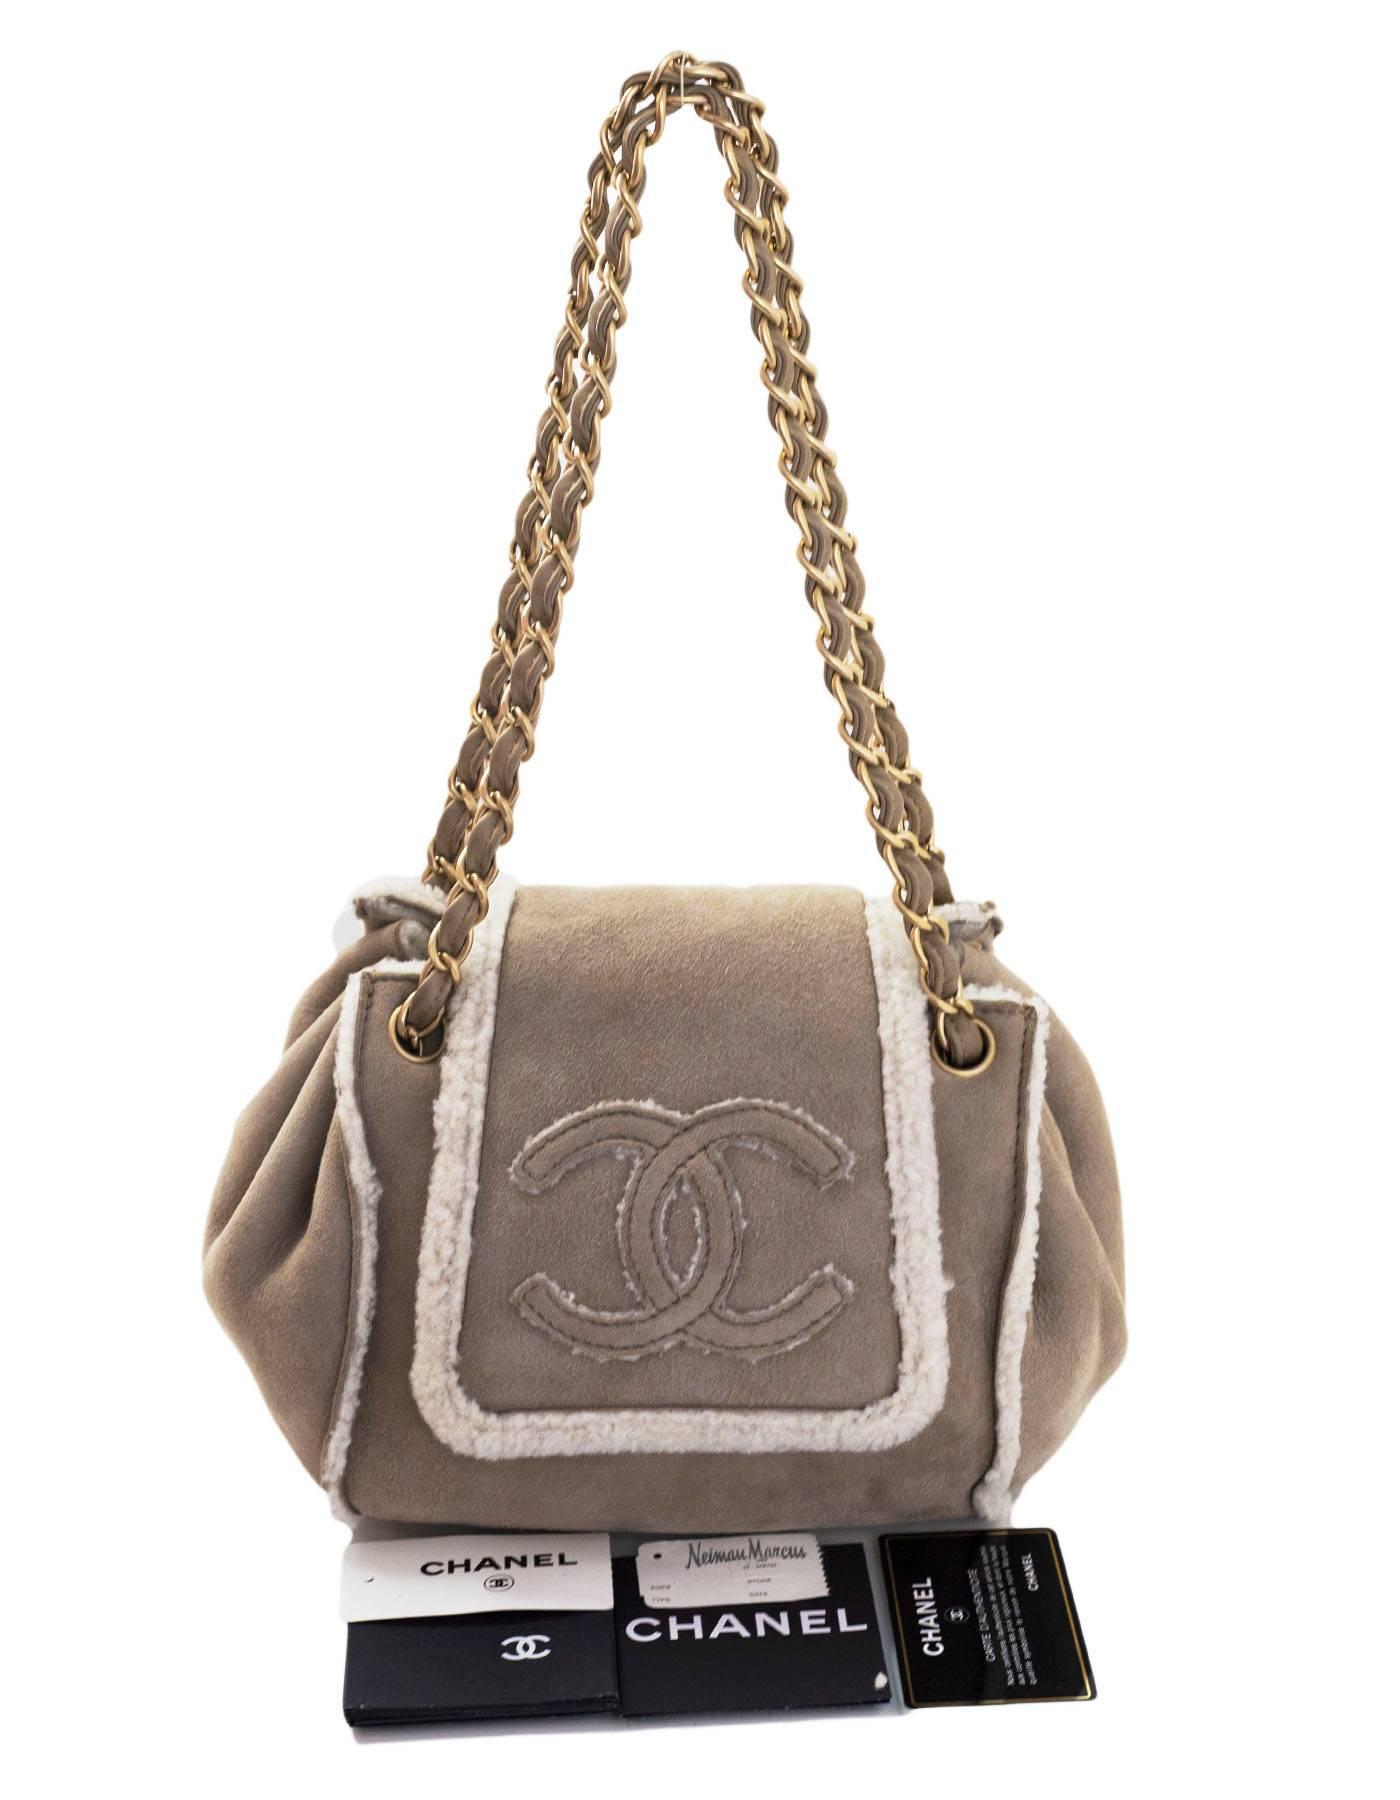 Chanel Beige Shearling Suede CC Small Accordion Bag 5